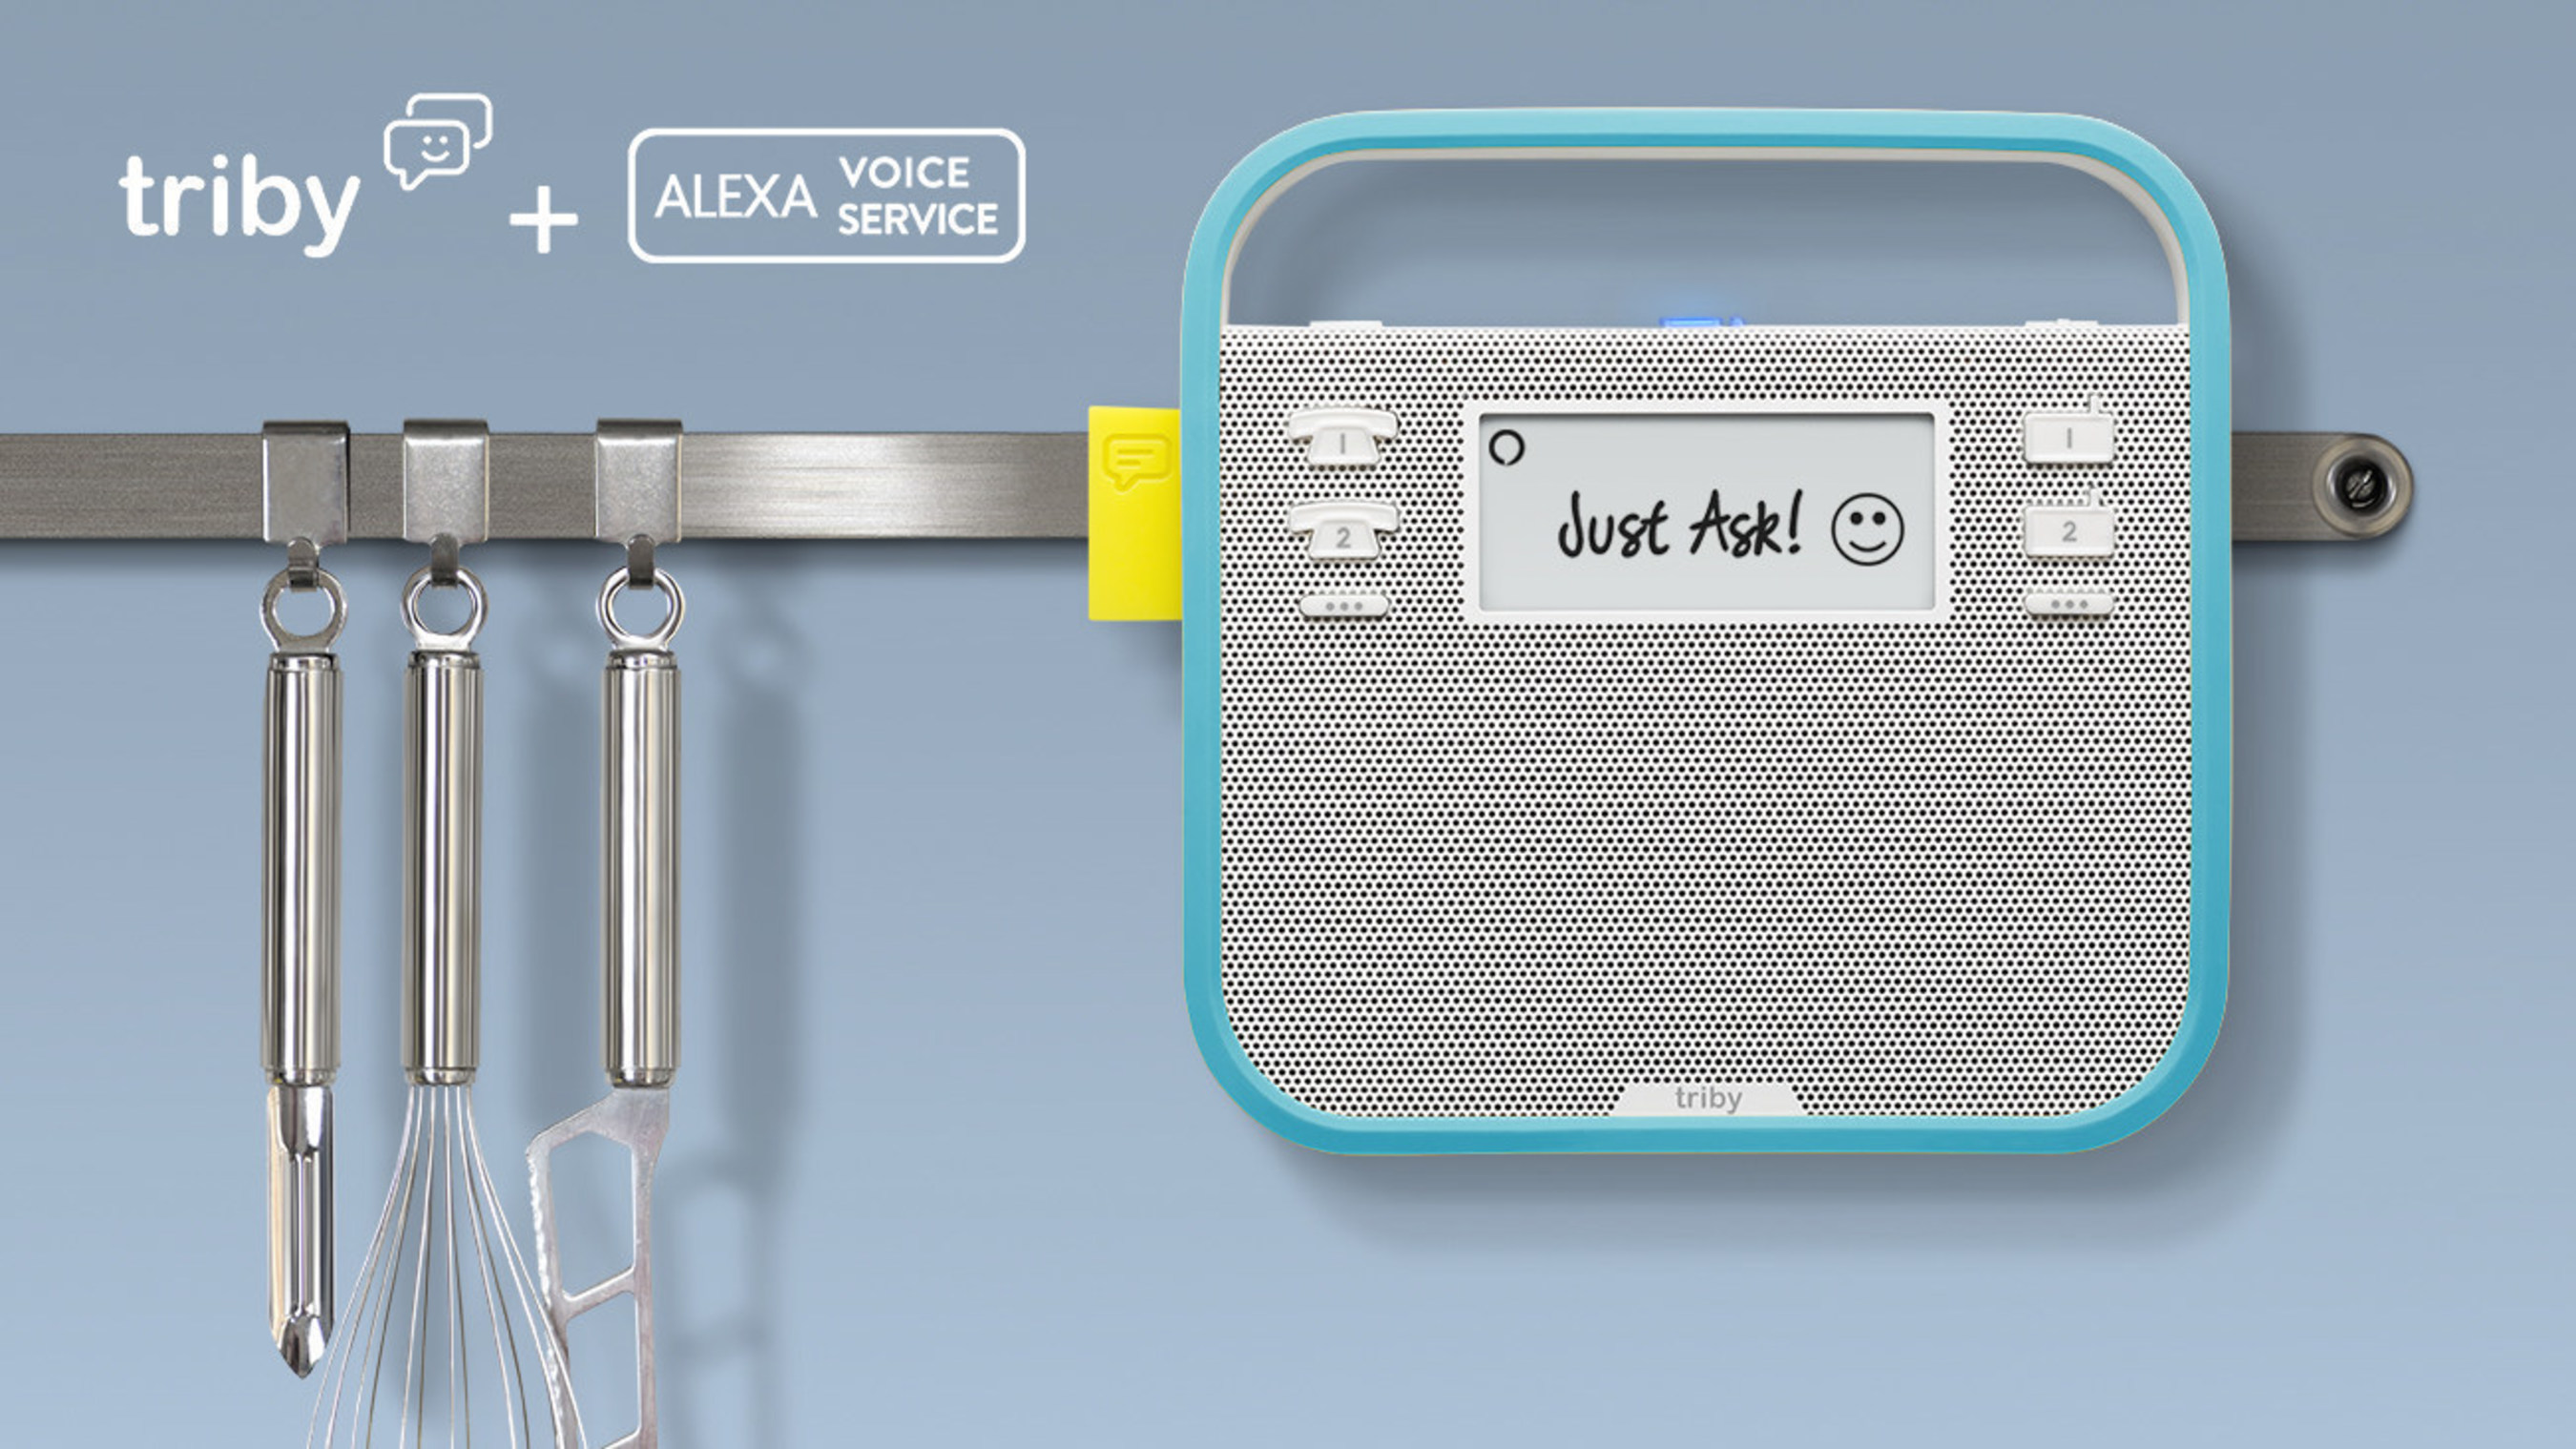 The Alexa-enabled Triby - a voice activated digital assistant, Internet radio, connected speaker, hands-free speakerphone, and connected message board all rolled into one.